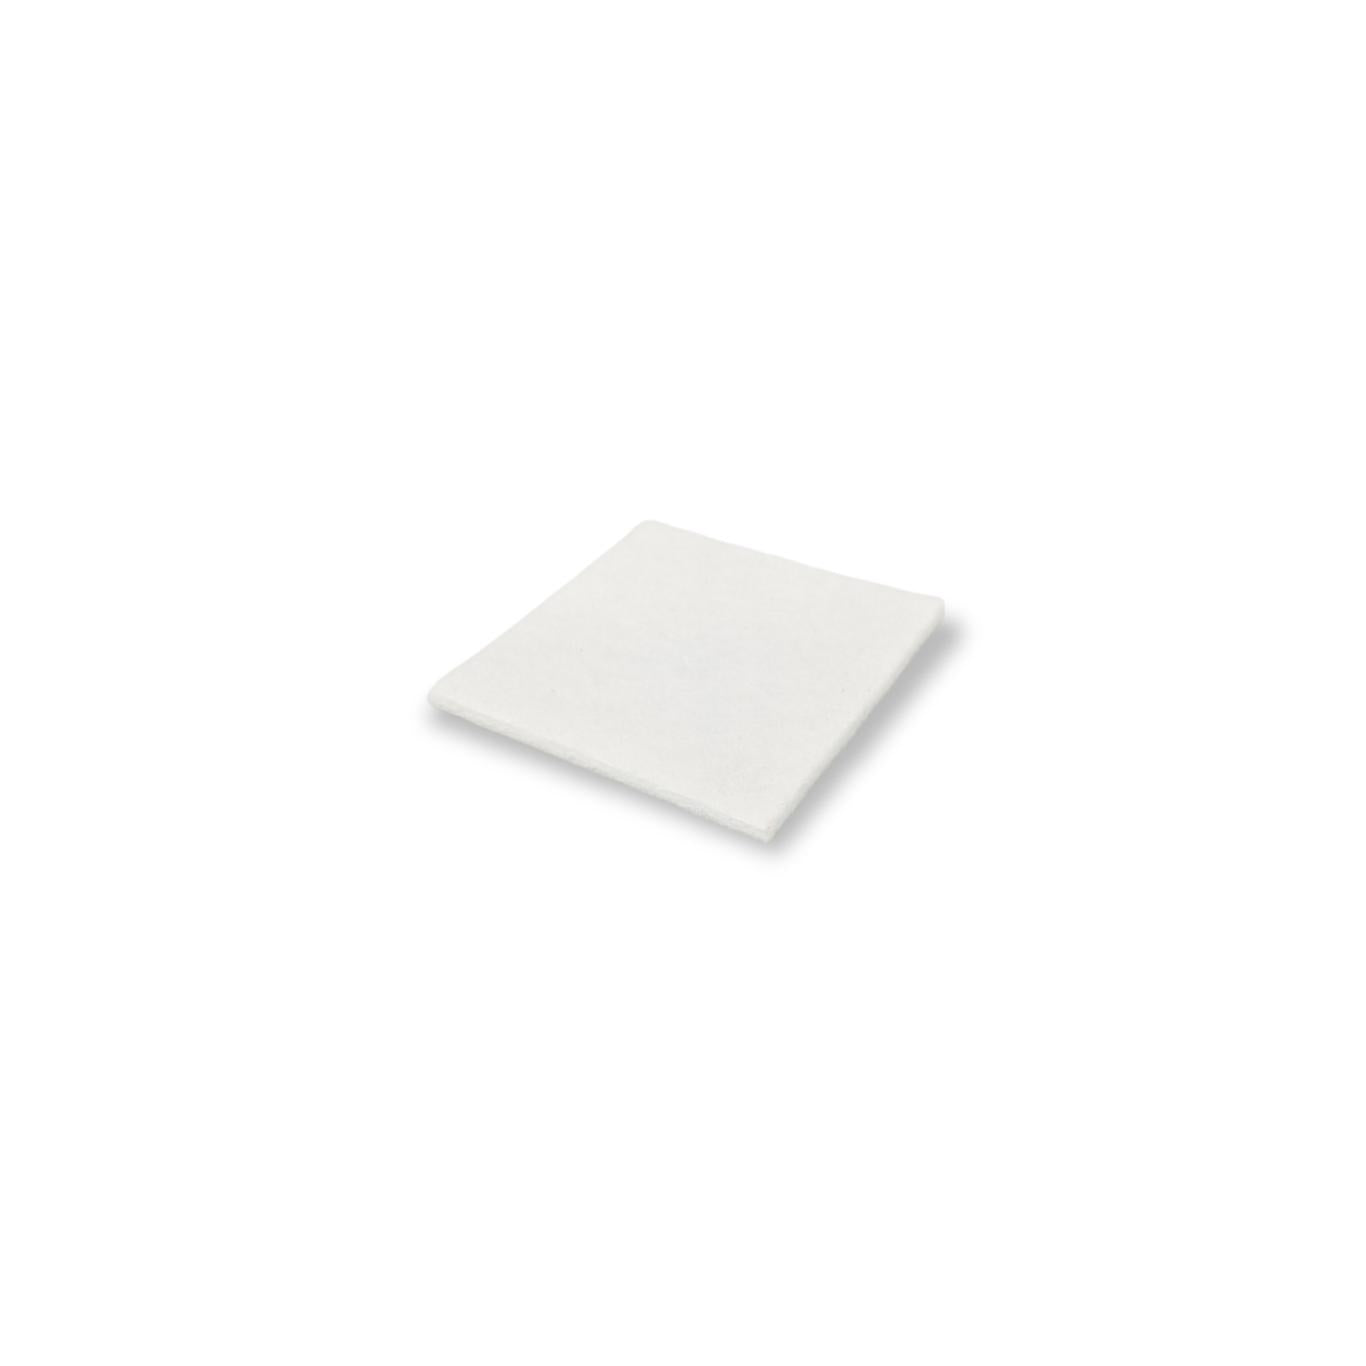 Felt Pads, Square Stick-On 22mm x 22mm, White - Made in Germany